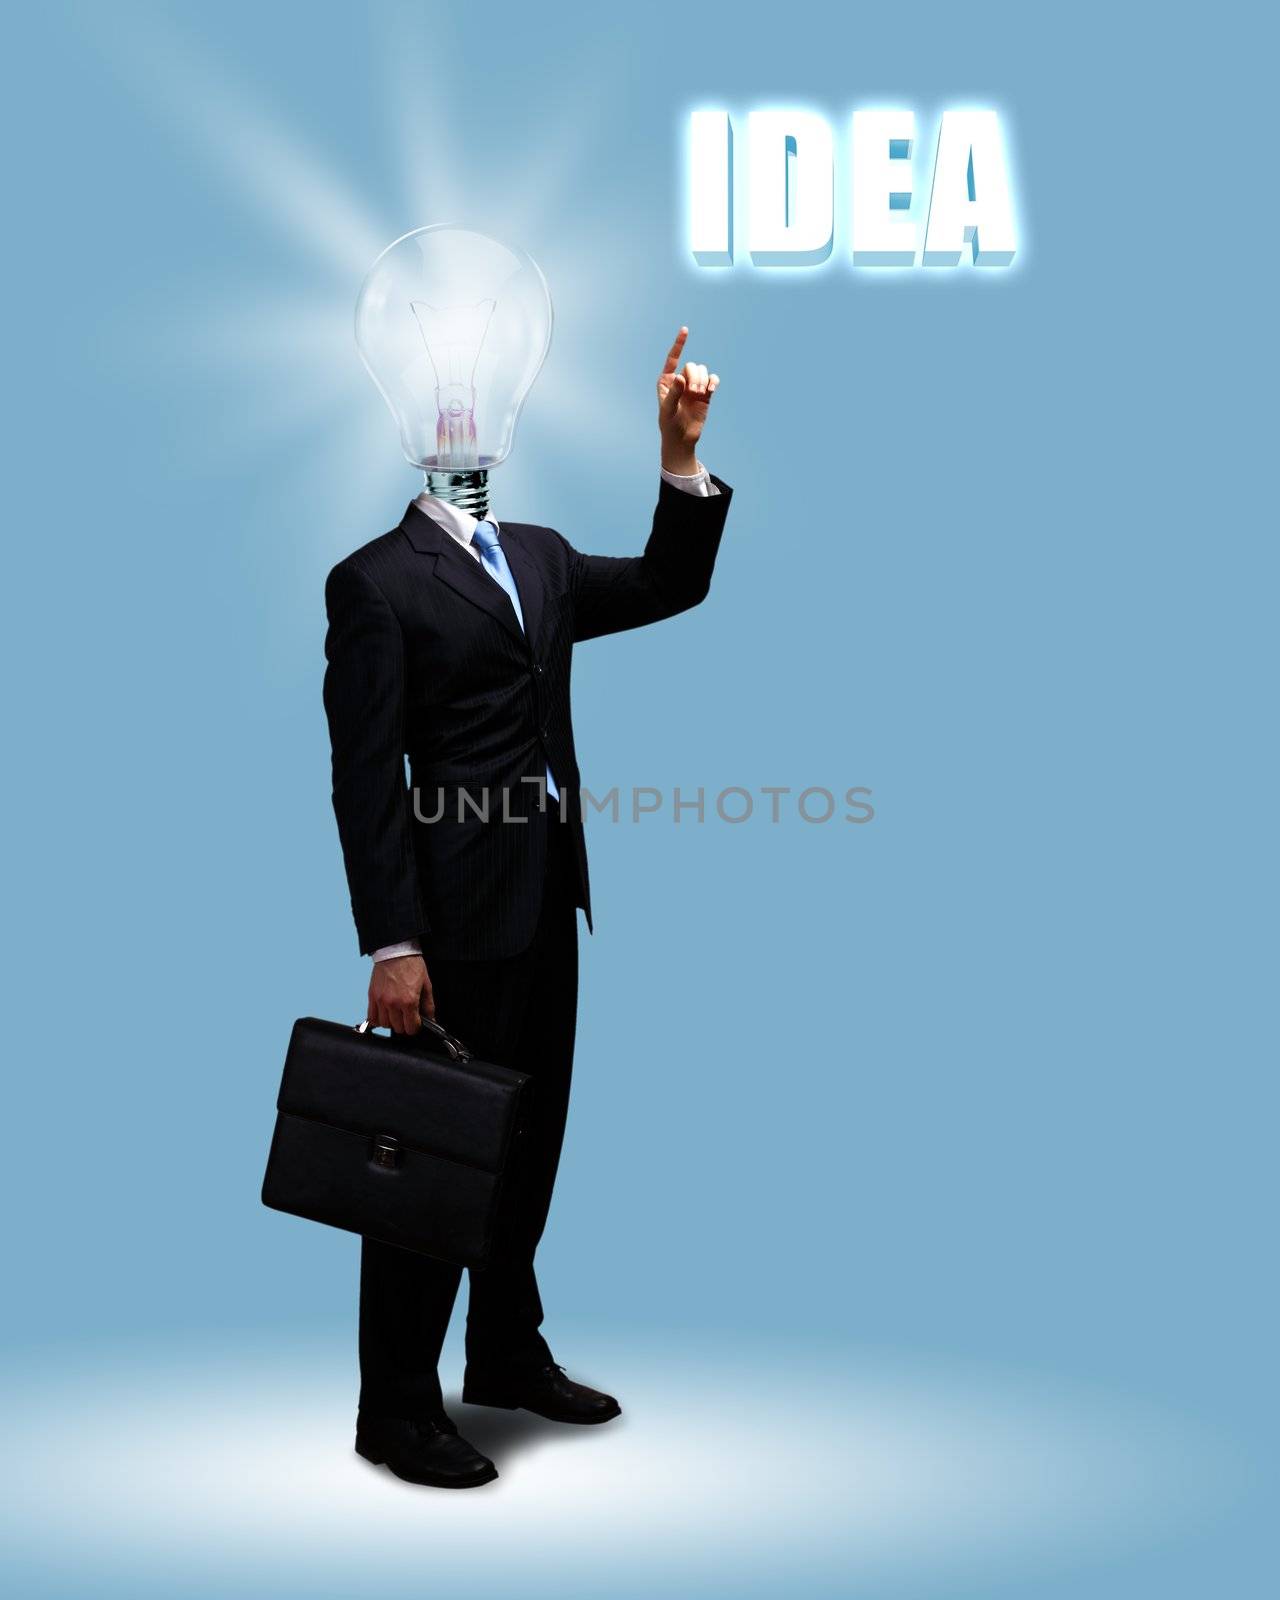 Ideas and creativity in business by sergey_nivens